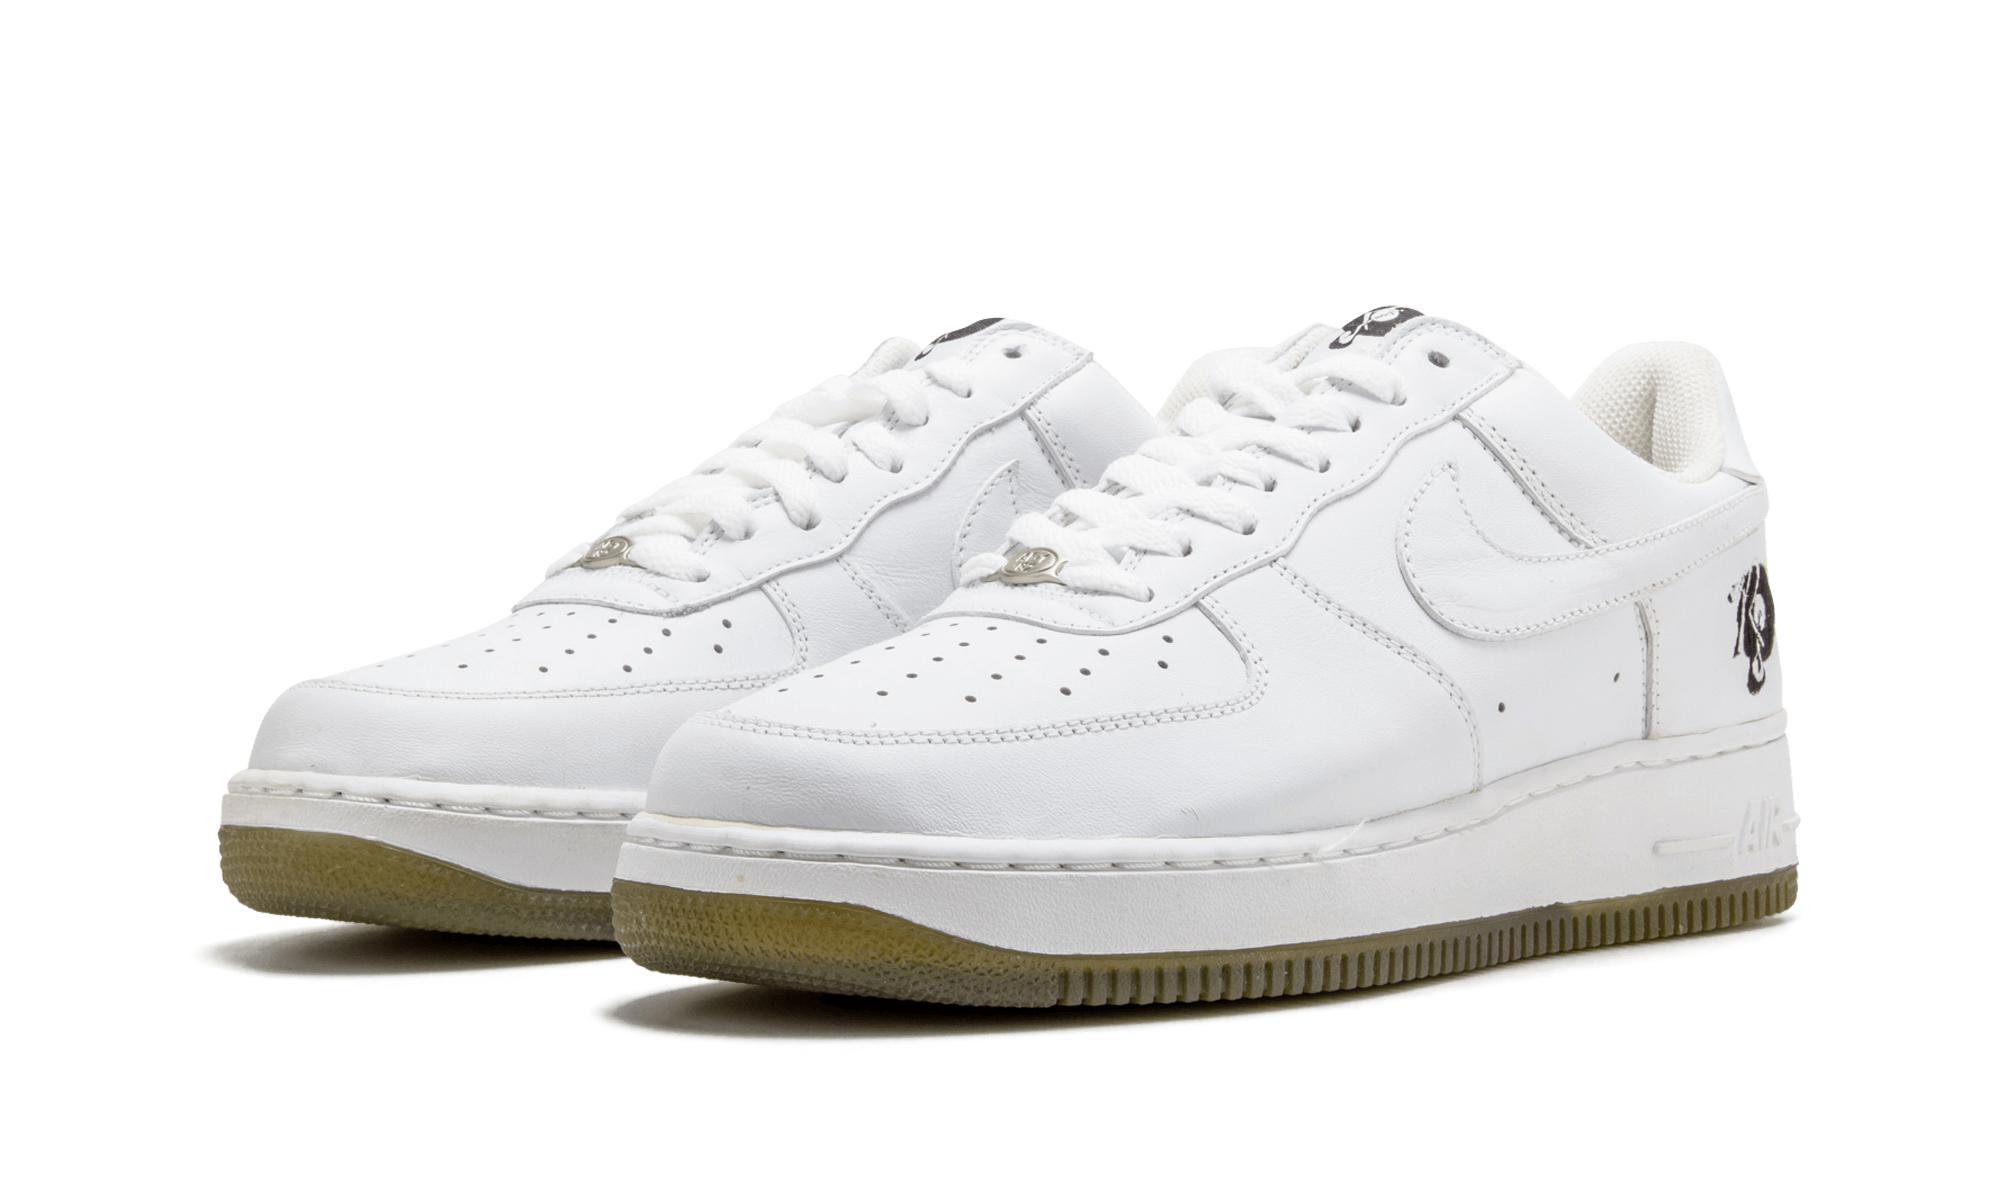 Nike Air Force 1 Le Prm in Black,White (White) for Men - Lyst